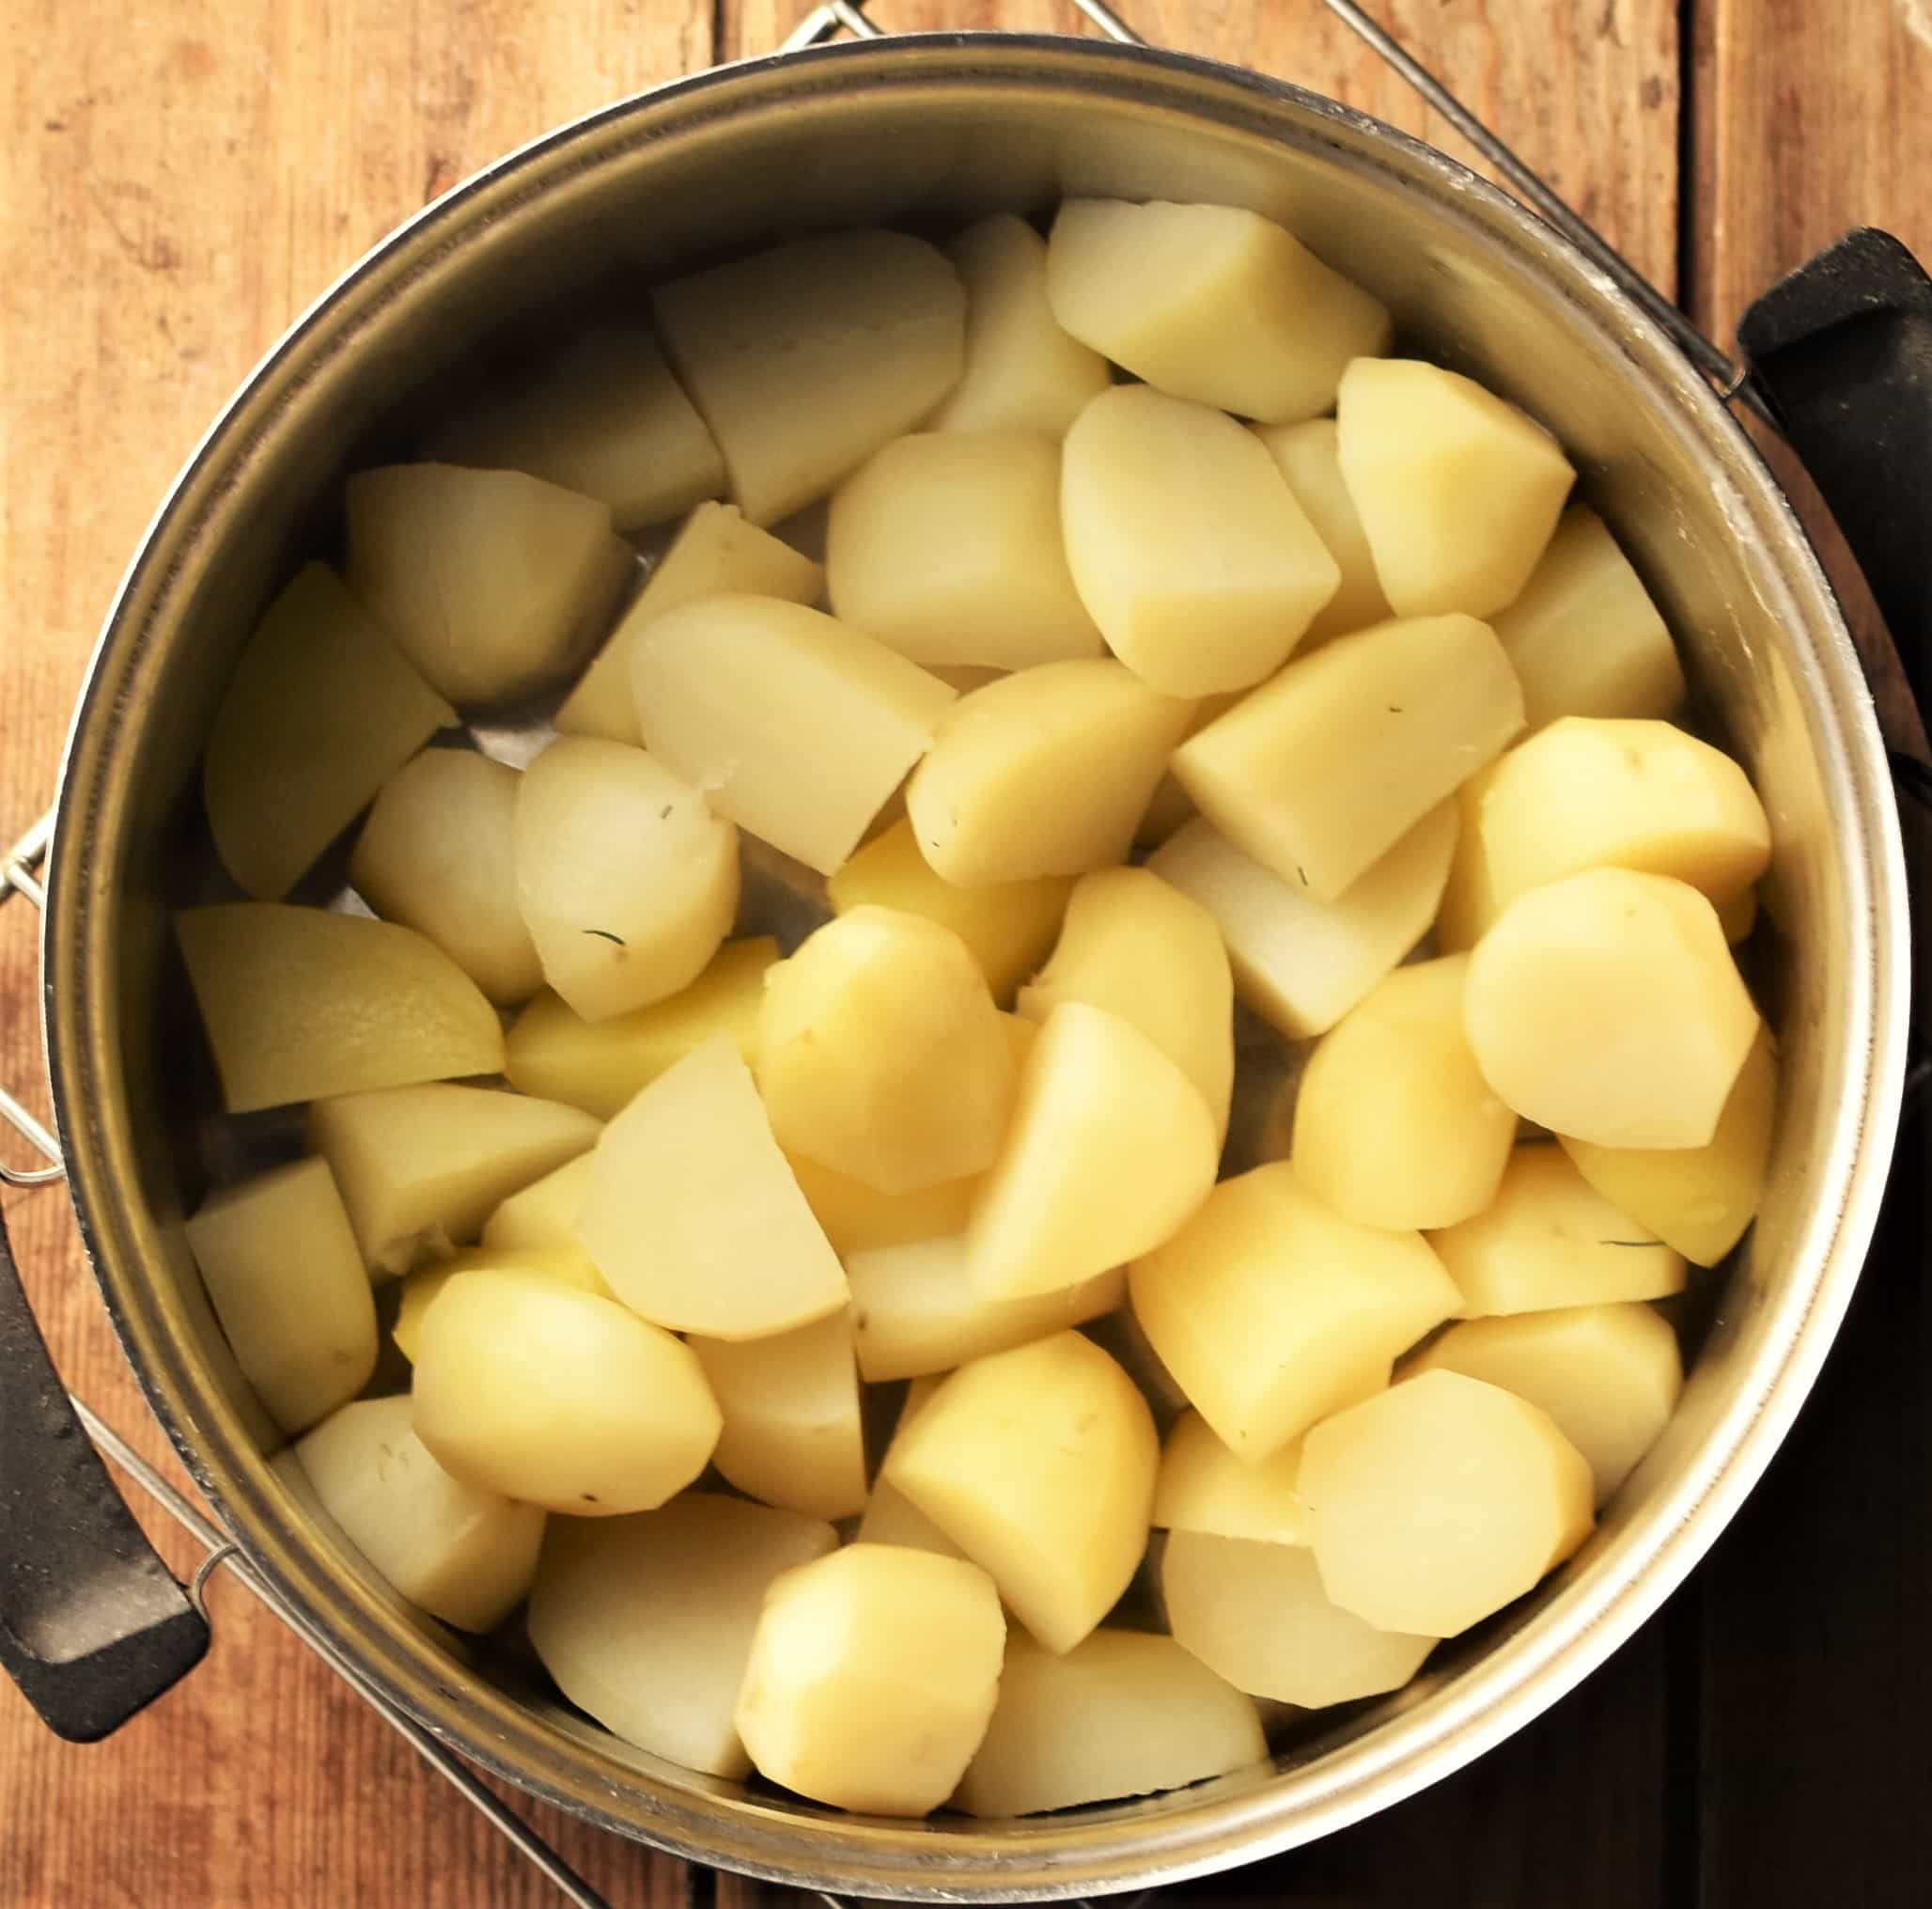 Cubed peeled potatoes in pot.